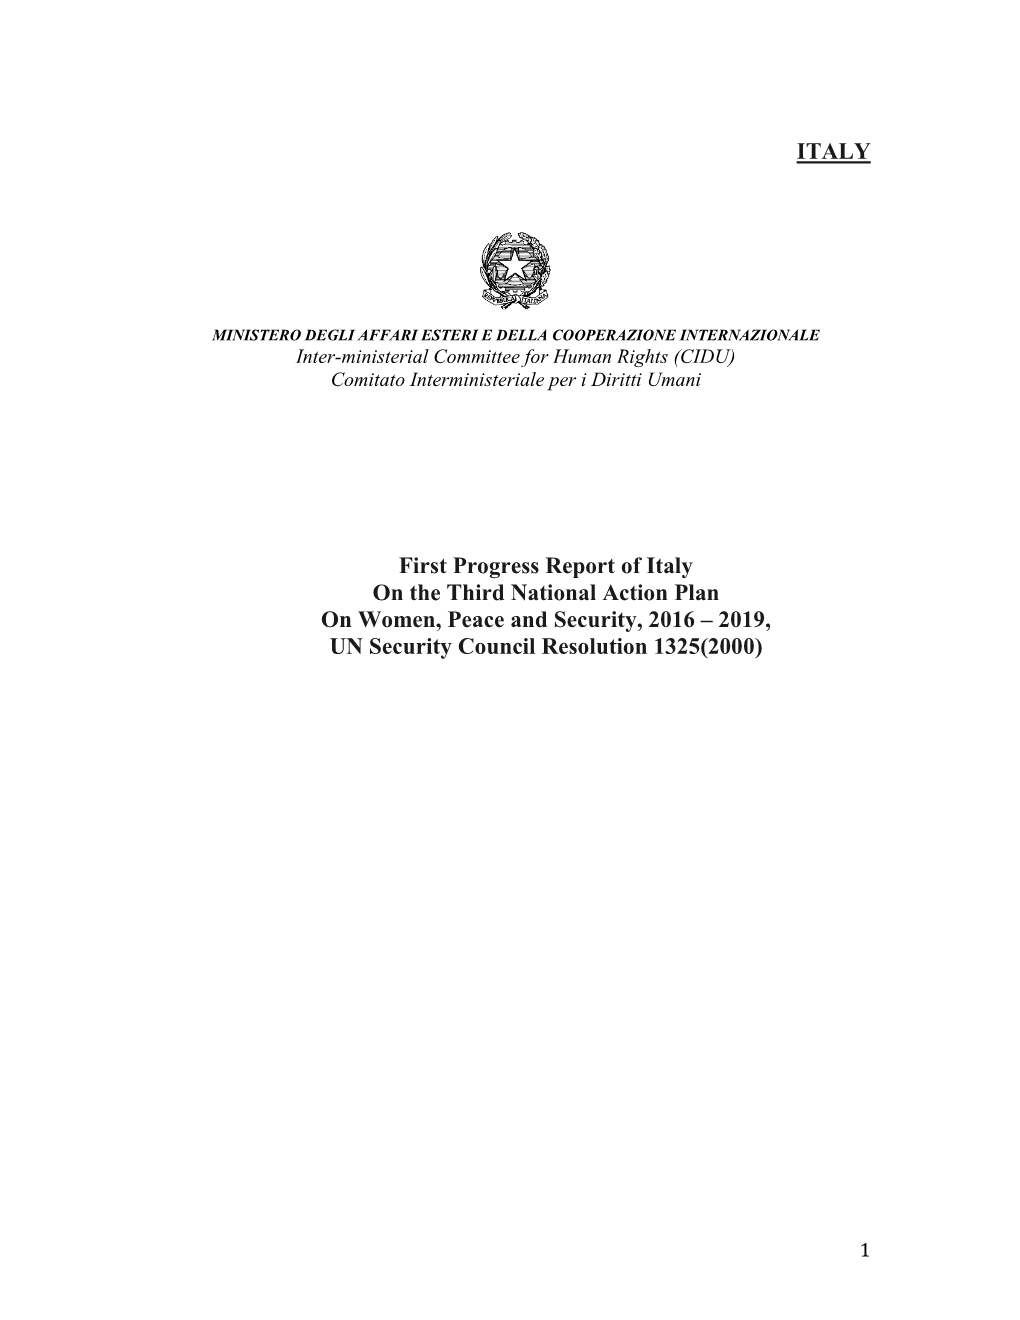 ITALY First Progress Report of Italy on the Third National Action Plan On